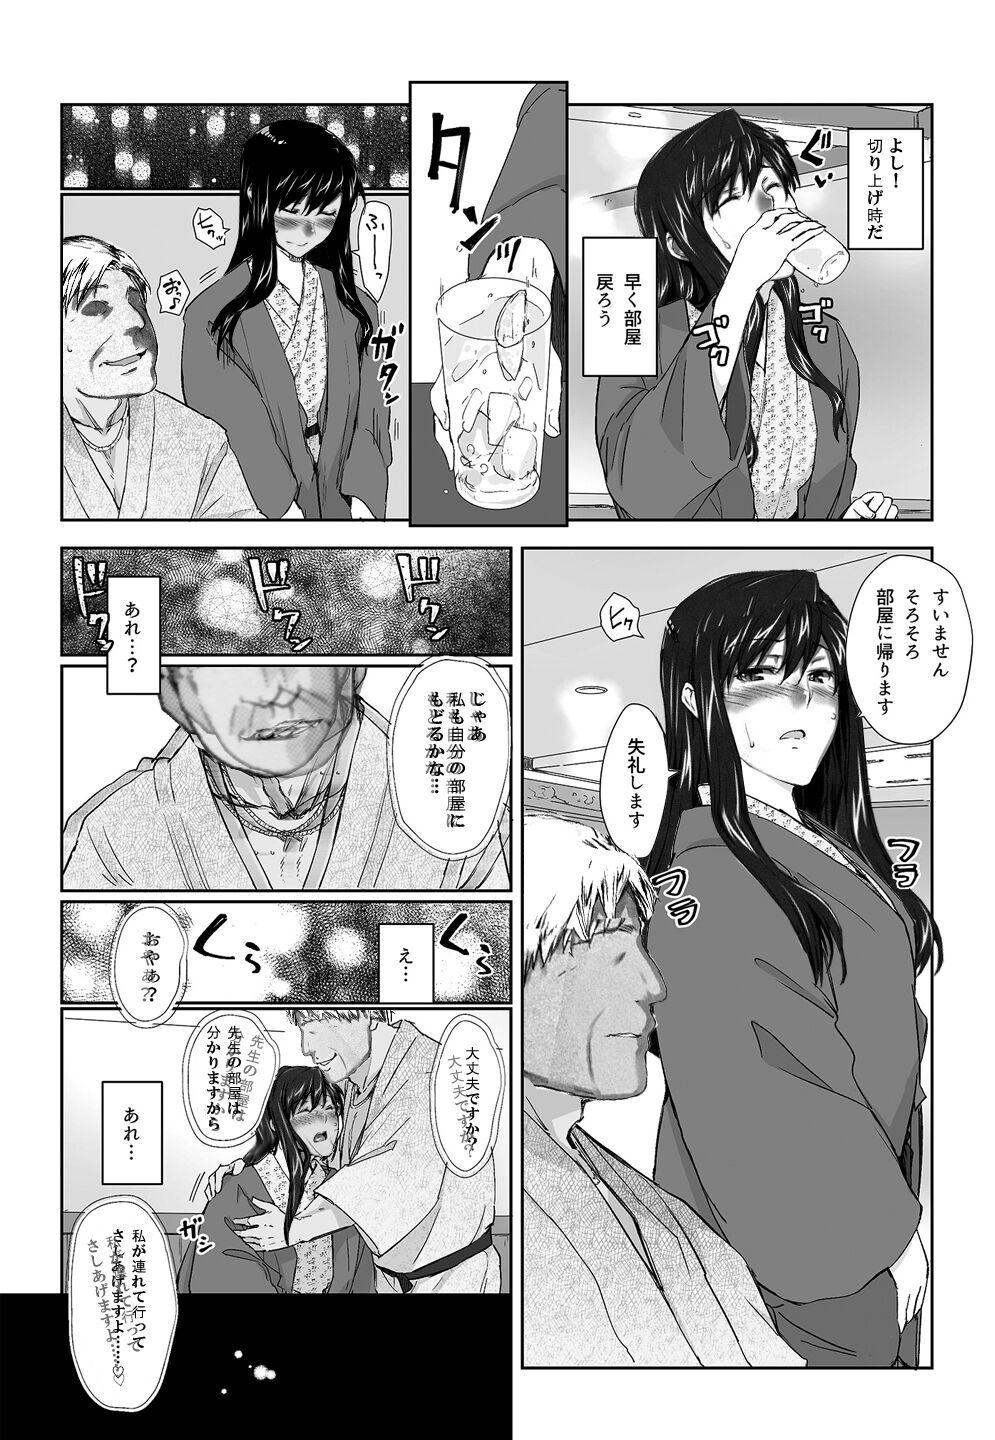 Sakiko-san in delusion Vol.8 revised ~Sakiko-san's circumstance at an educational training Route3~ (collage) (Continue to “First day of study trip” (page 42) of Vol.1) 4